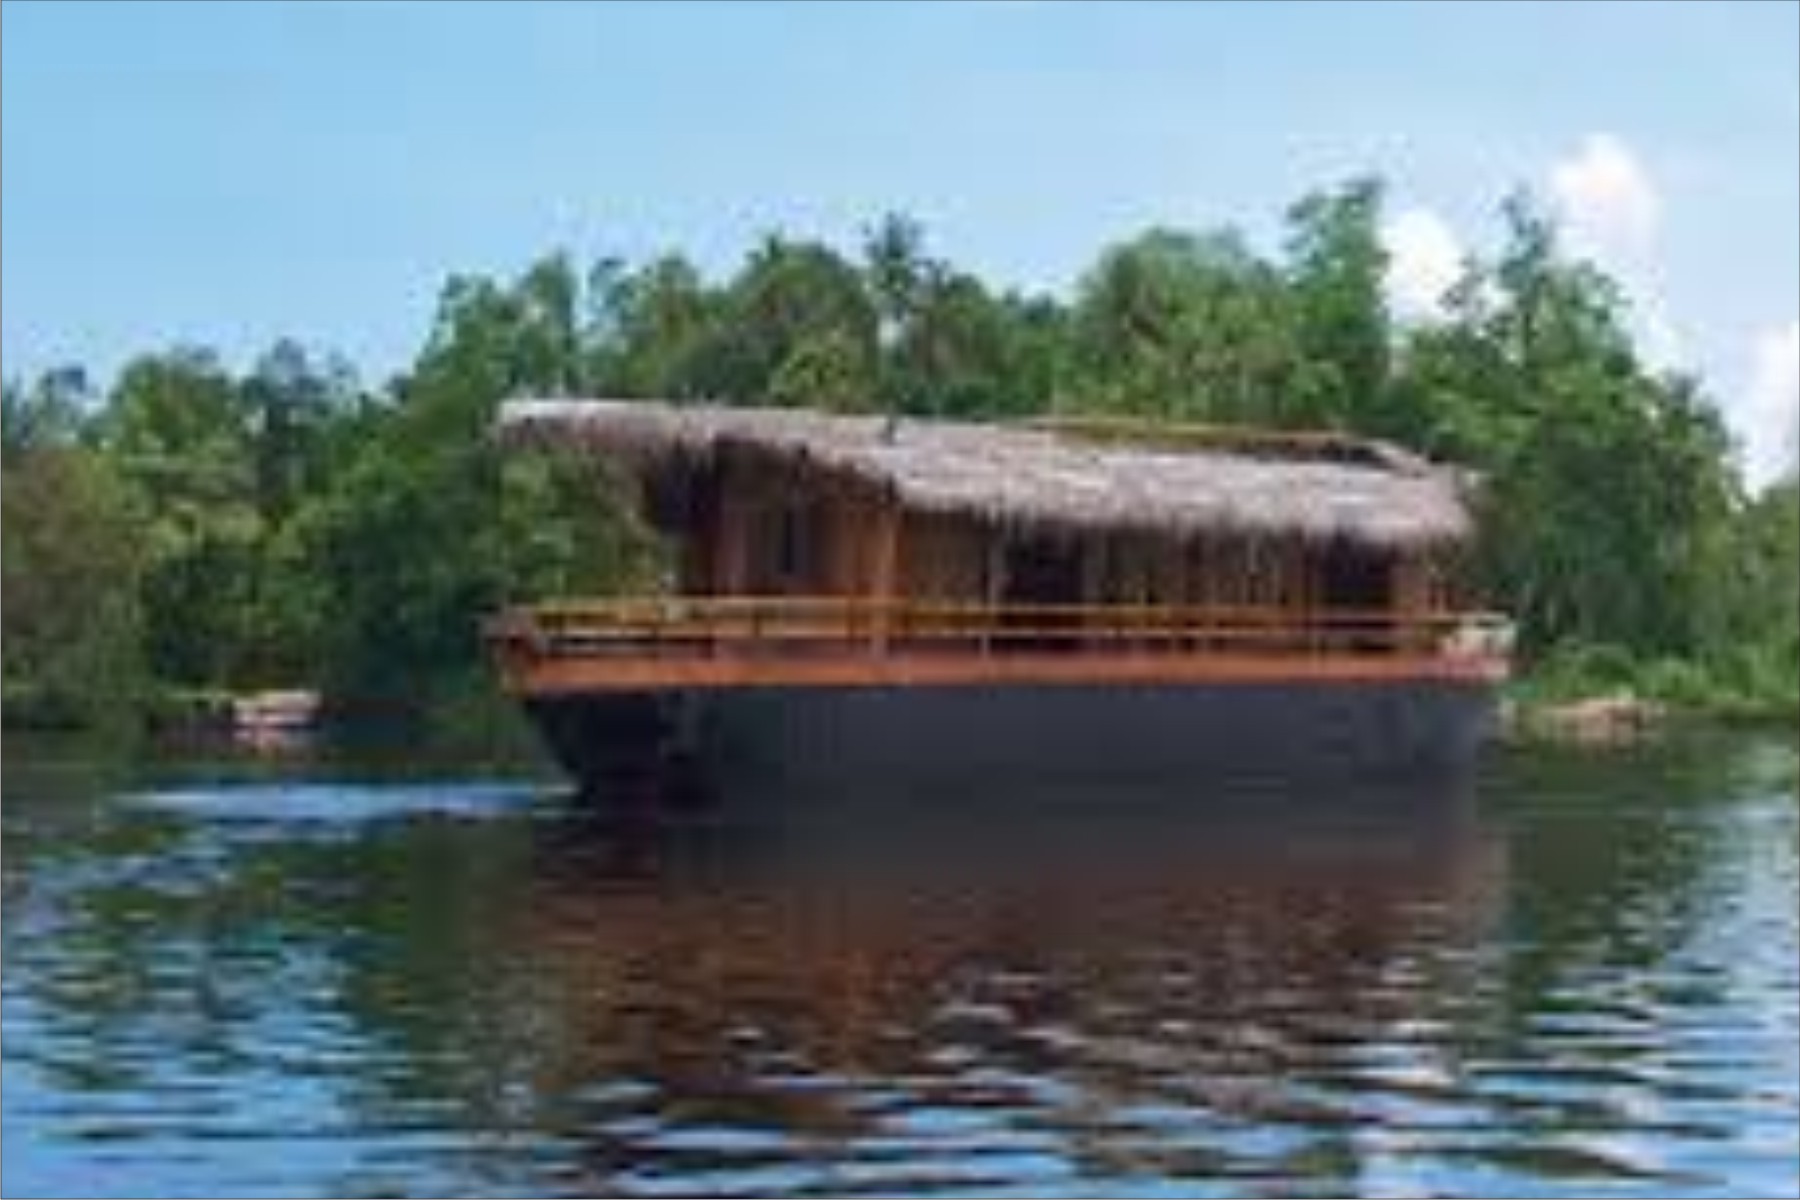 Pioneering cruise by ‘Yathra’ on Benthara river